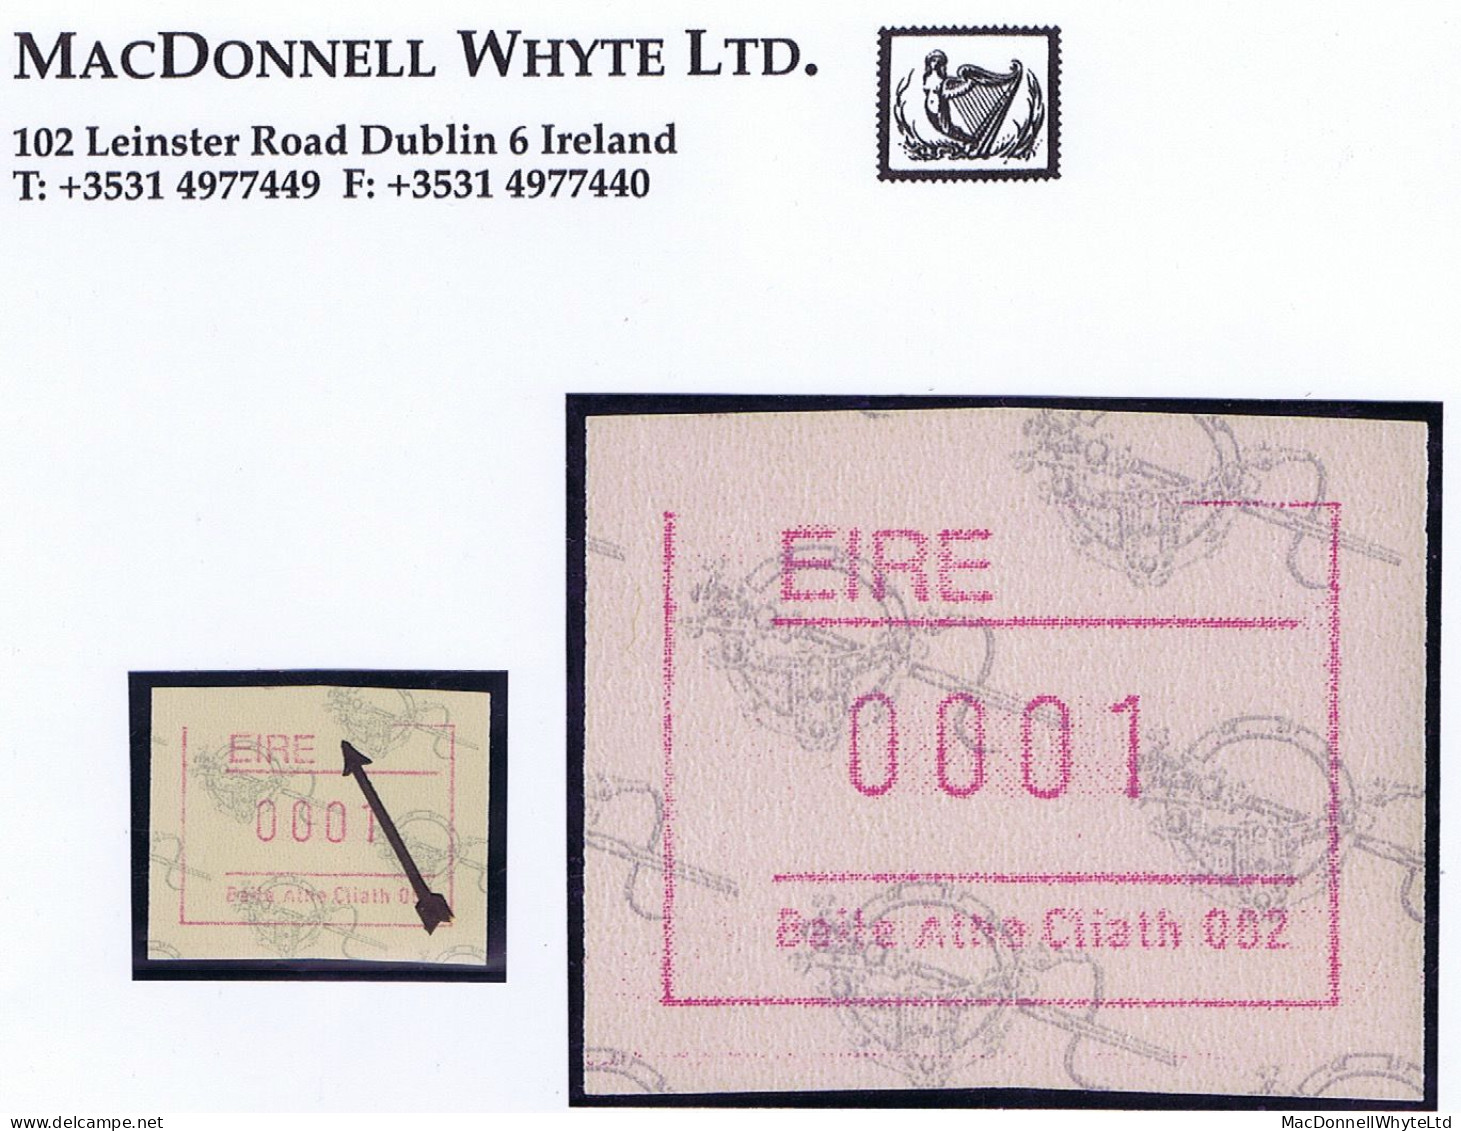 Ireland Dublin 1992 Frama Automatic Postage Labels, Dublin No.2 Machine "top Frameline Mostly Omitted" Mint - Franking Labels